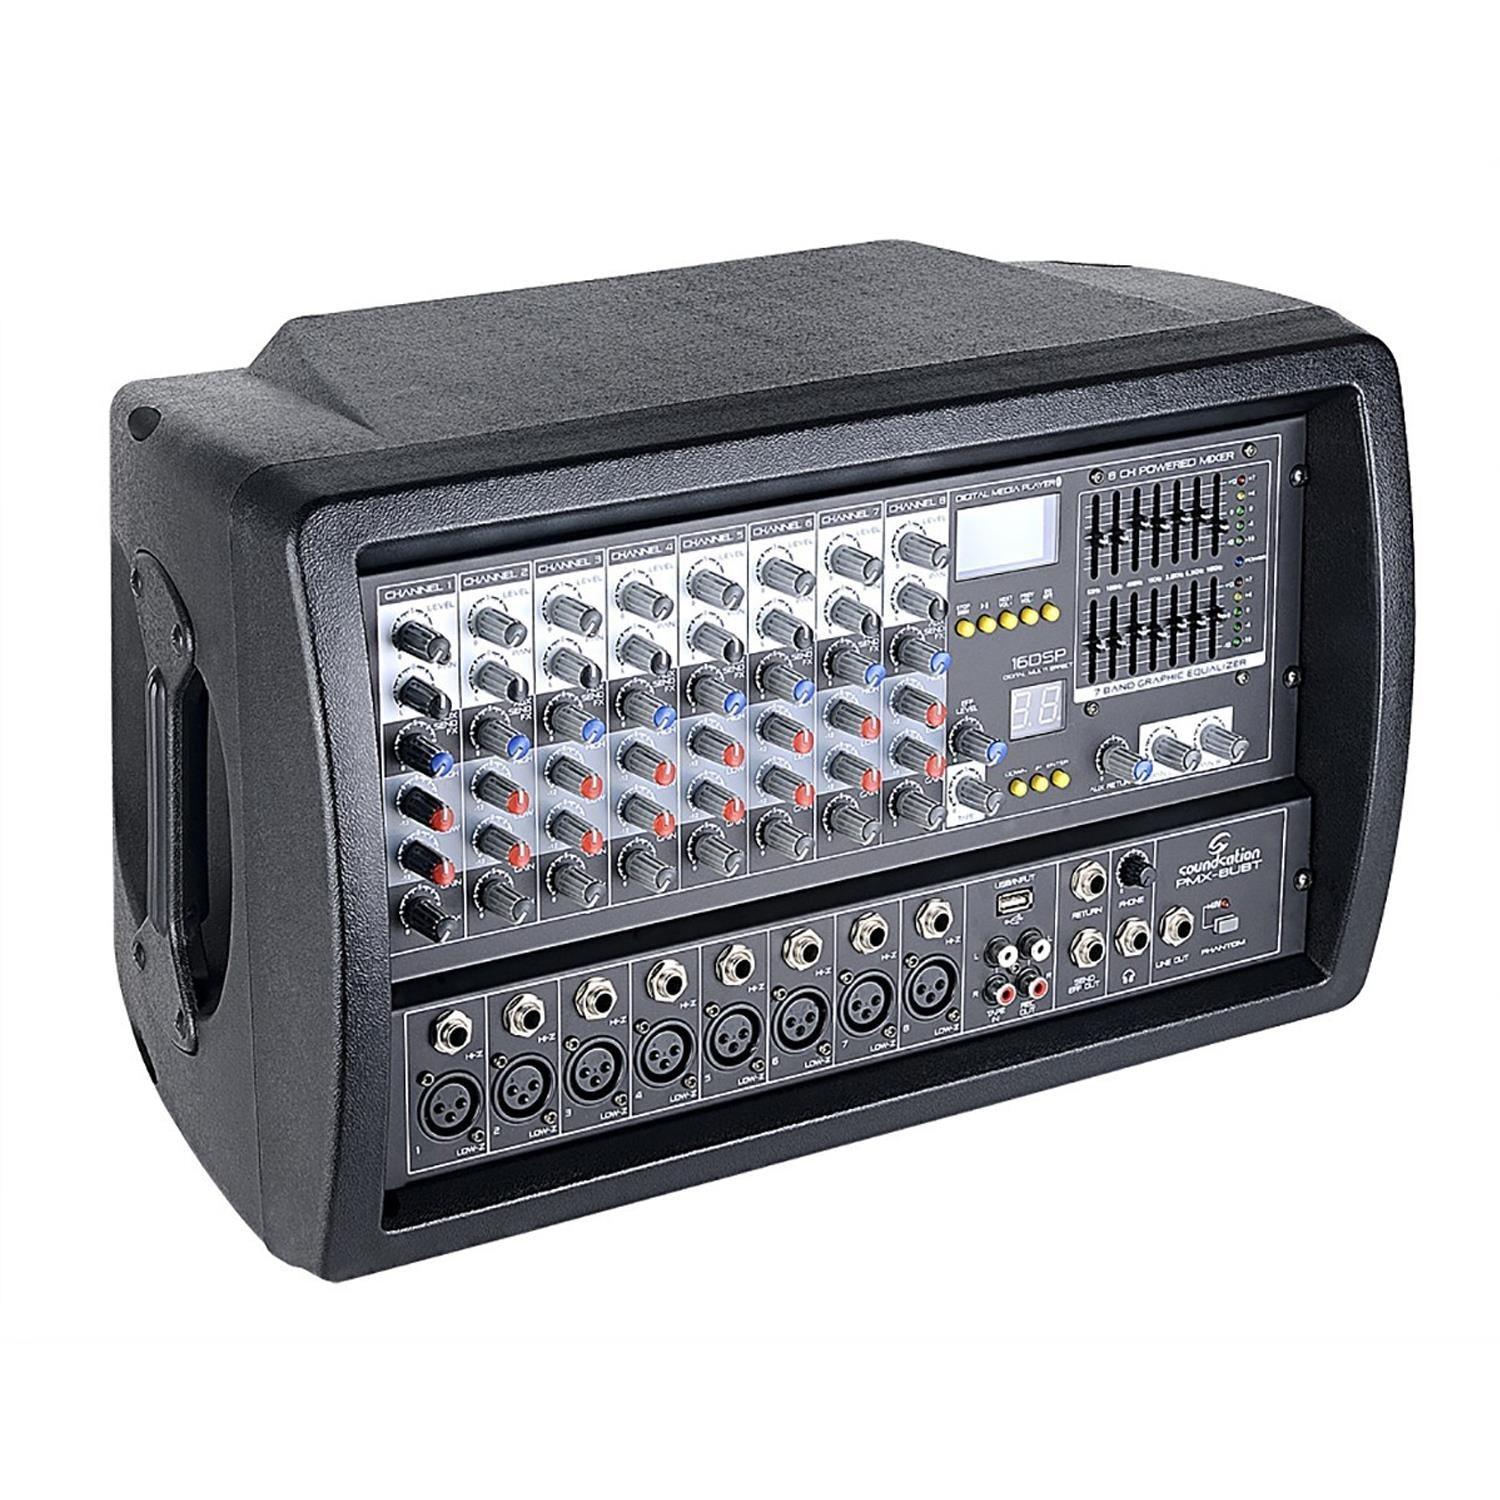 Soundsation PMX-8UBT 8 channel 300w Max Powered Mixer with Blueooth, Effects - DY Pro Audio